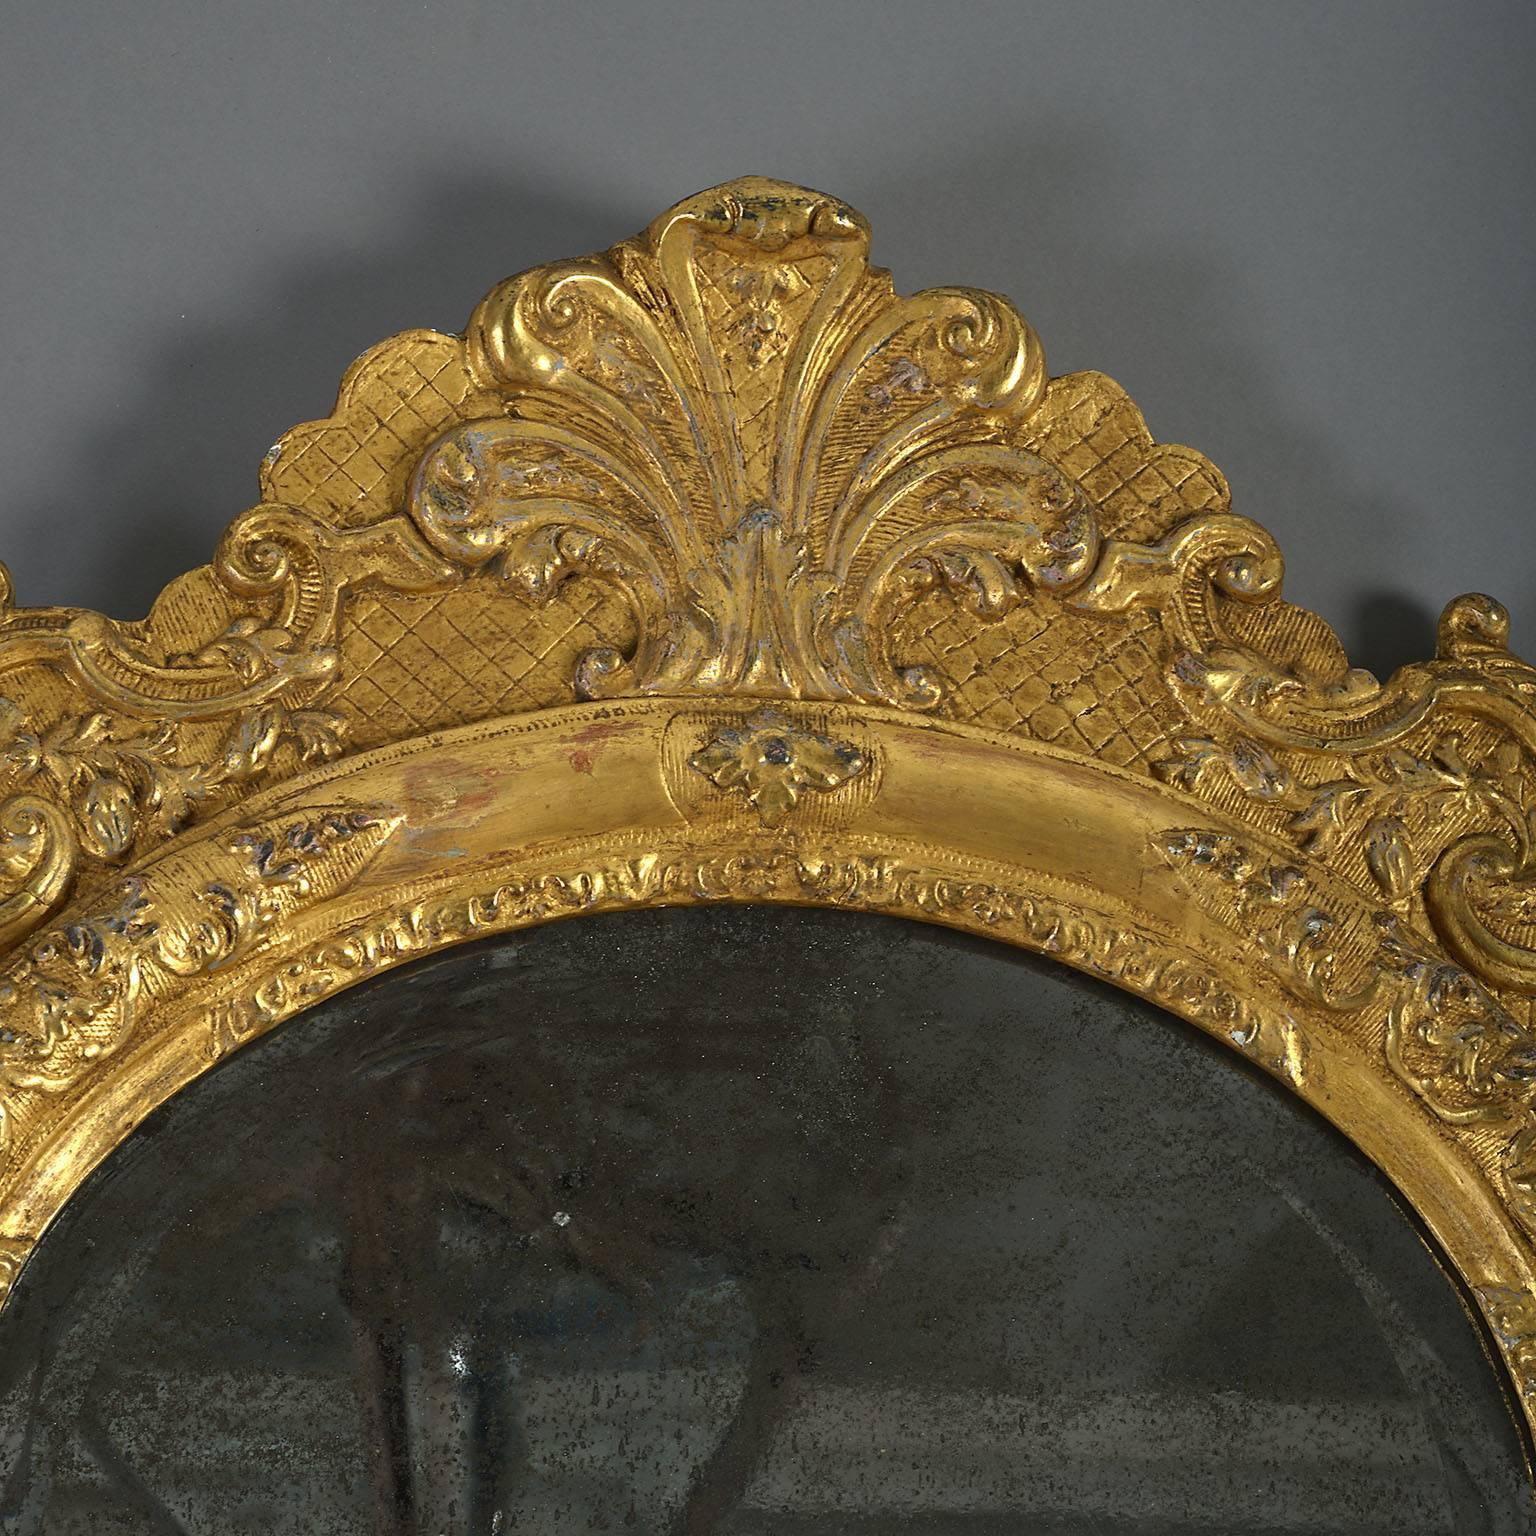 The original arched, divided mirror plate with softly bevelled edges contained within a moulded frame carved with panels of strapwork, stylised foliage and scrollwork and with a lambrequin cresting. This is an exceedingly rare and early